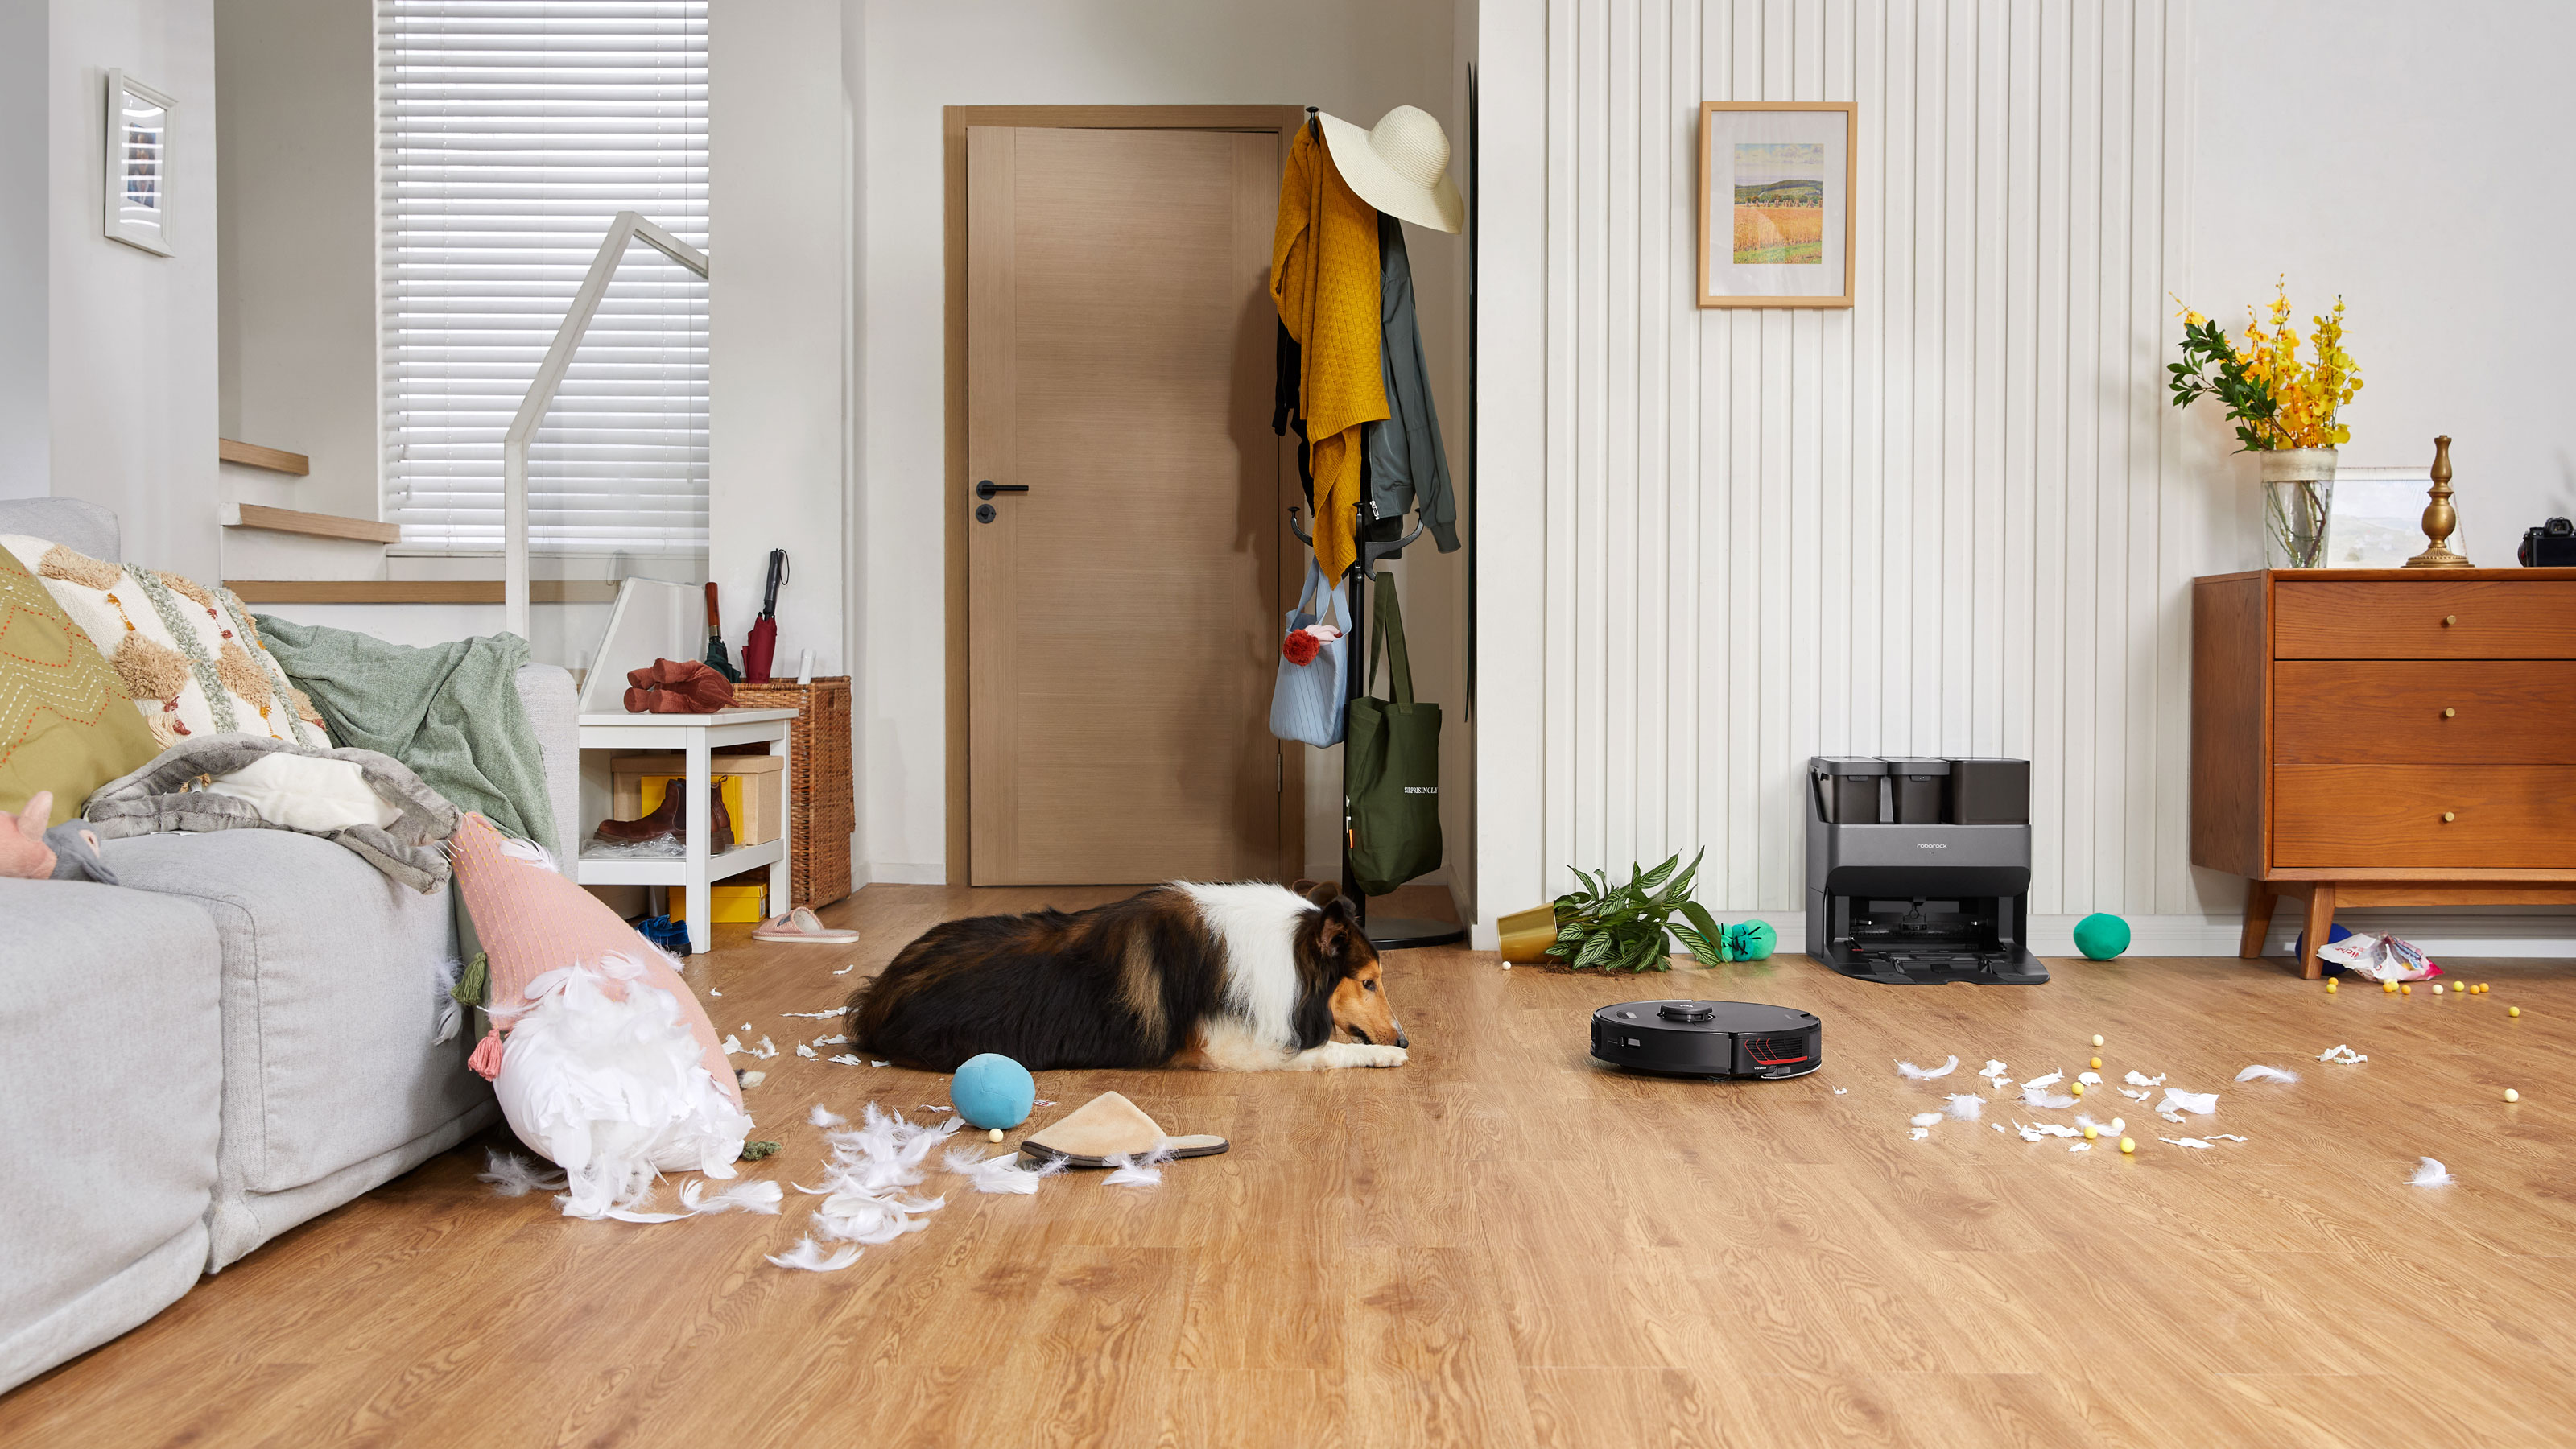 The Roborock S7 changed my mind about robot vacuums in tiny apartments